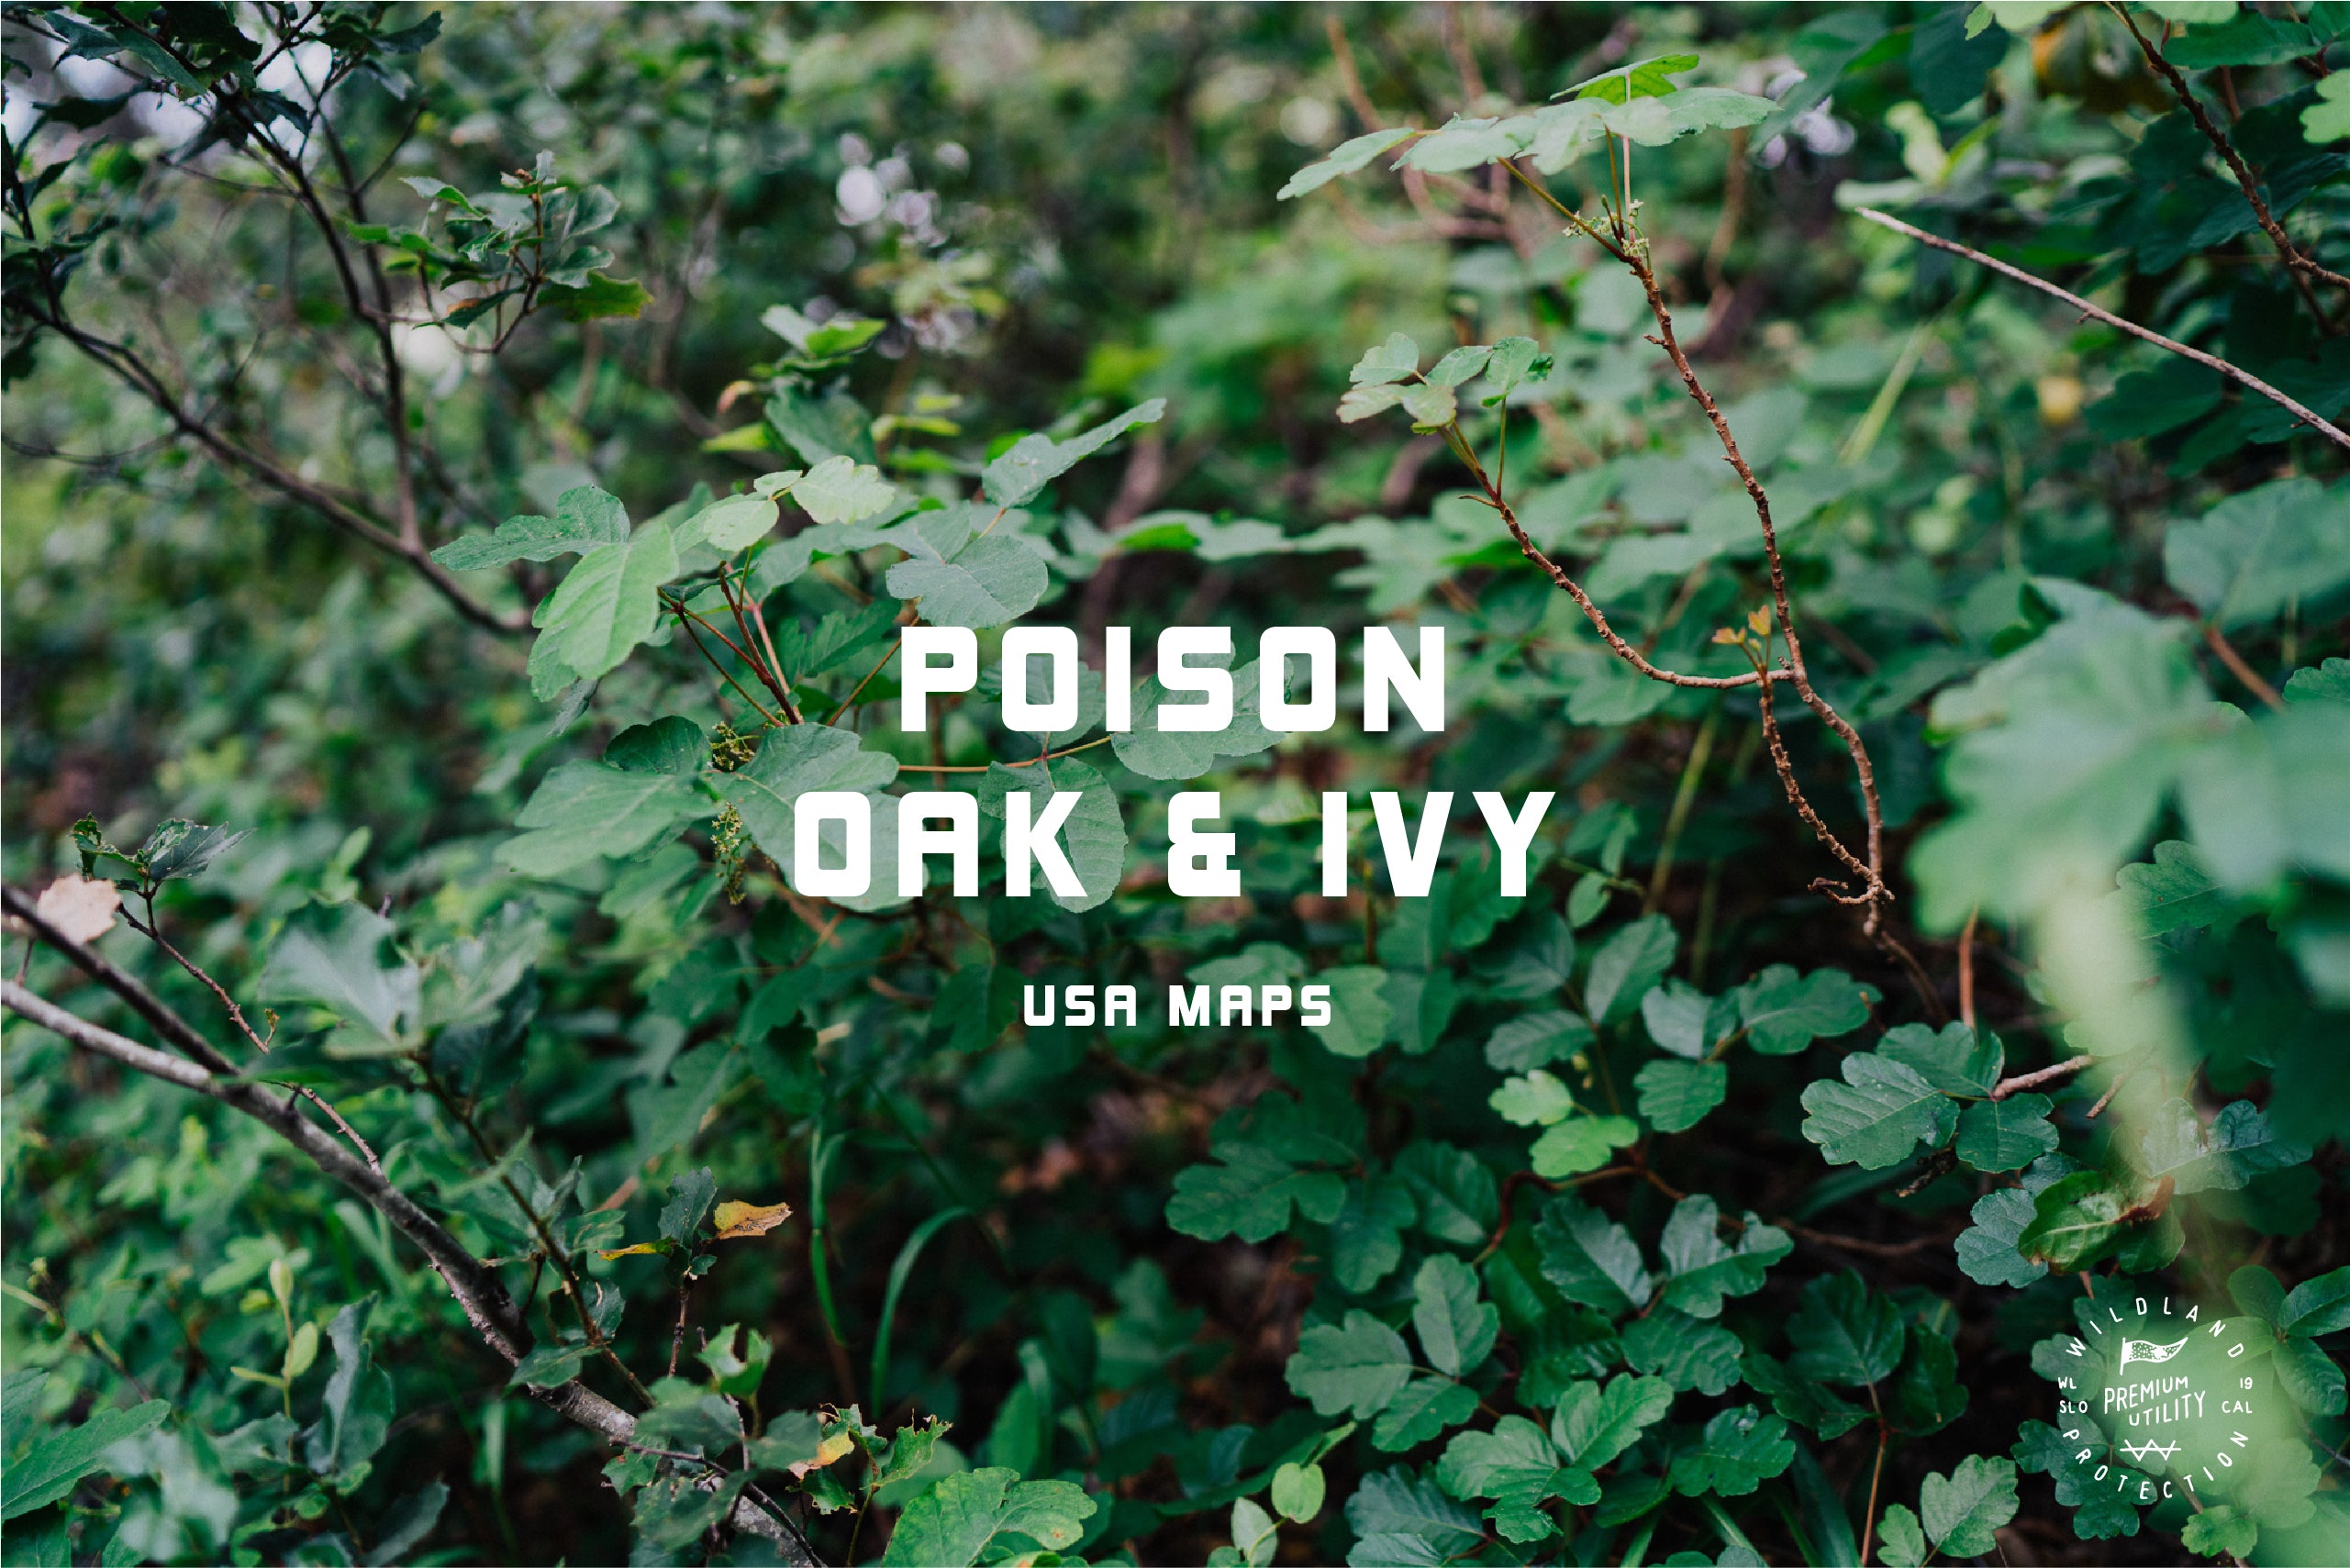 Locations of Poison Oak & Ivy